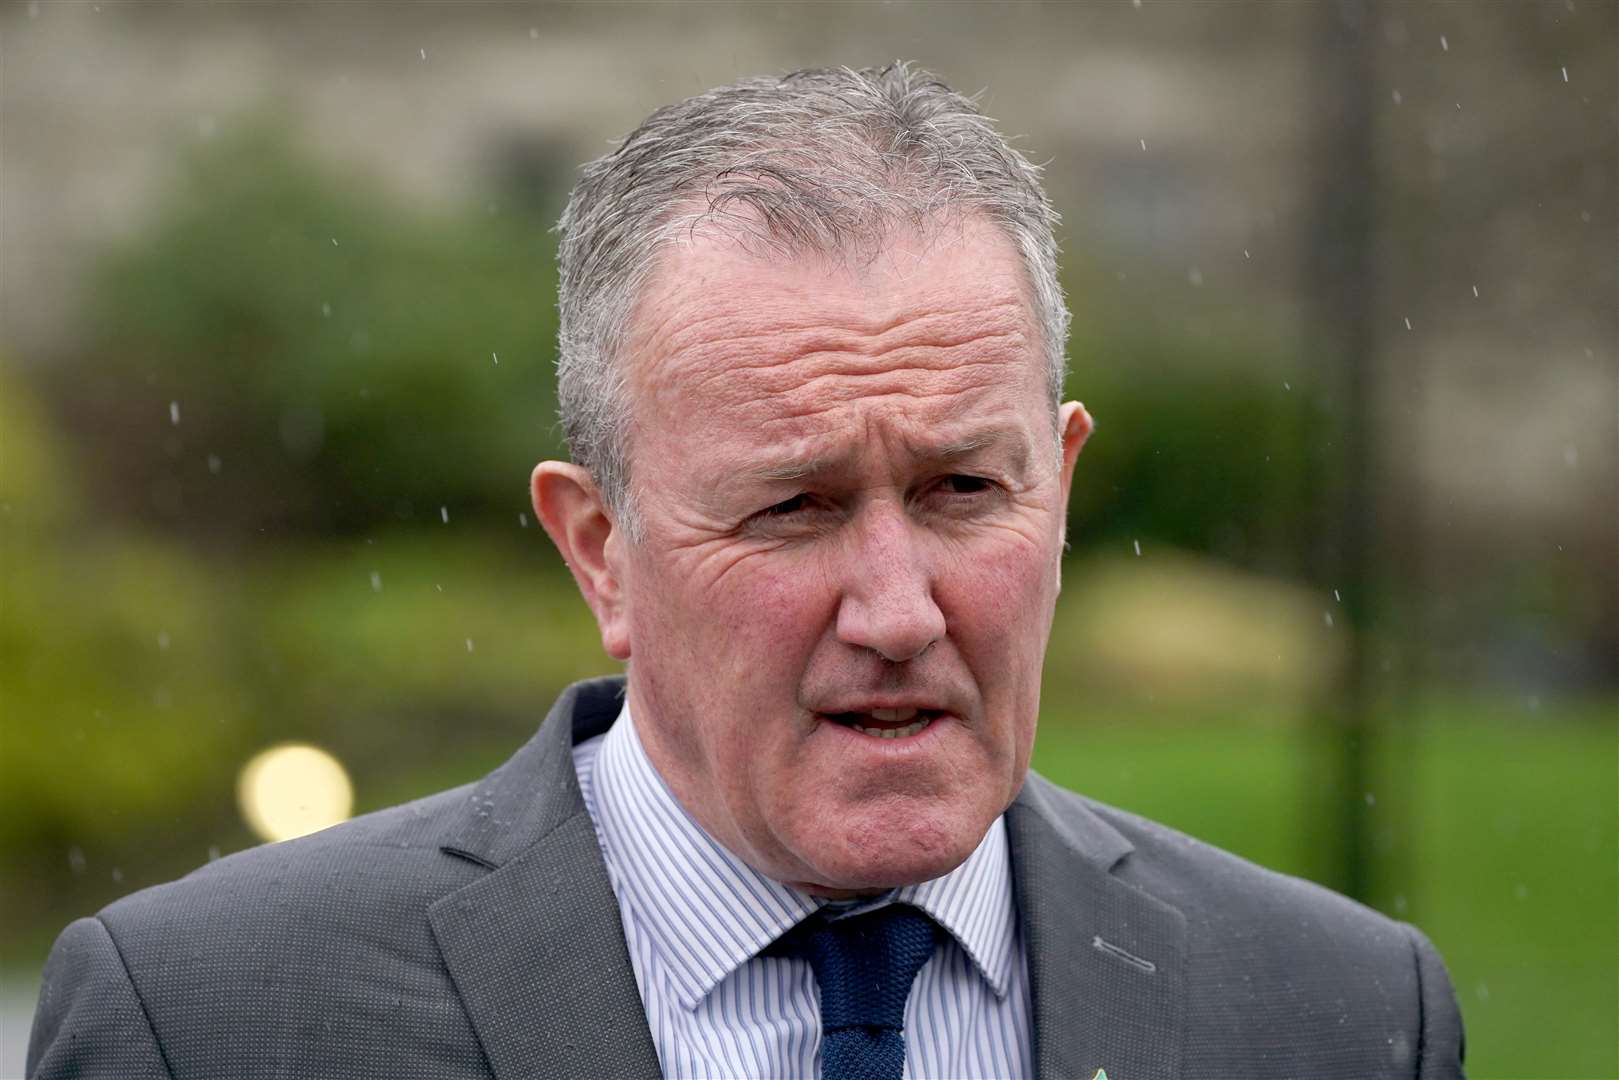 Conor Murphy said it was a ‘missed opportunity’ that the Stormont powersharing institutions were not operational for the visit of the President (Brian Lawless/PA)